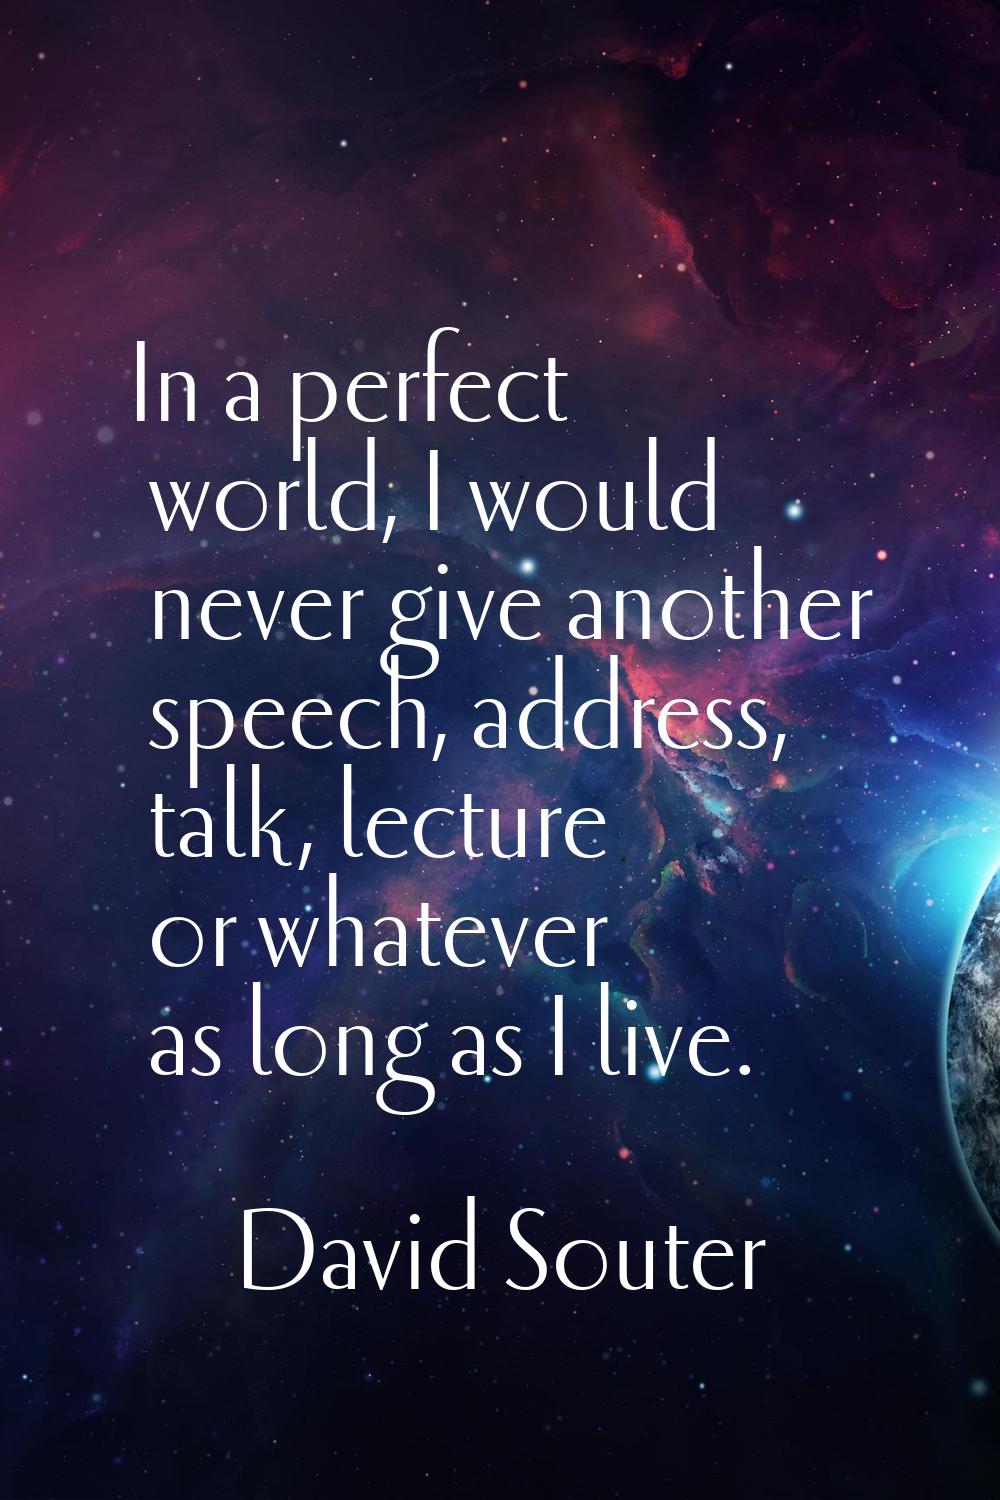 In a perfect world, I would never give another speech, address, talk, lecture or whatever as long a